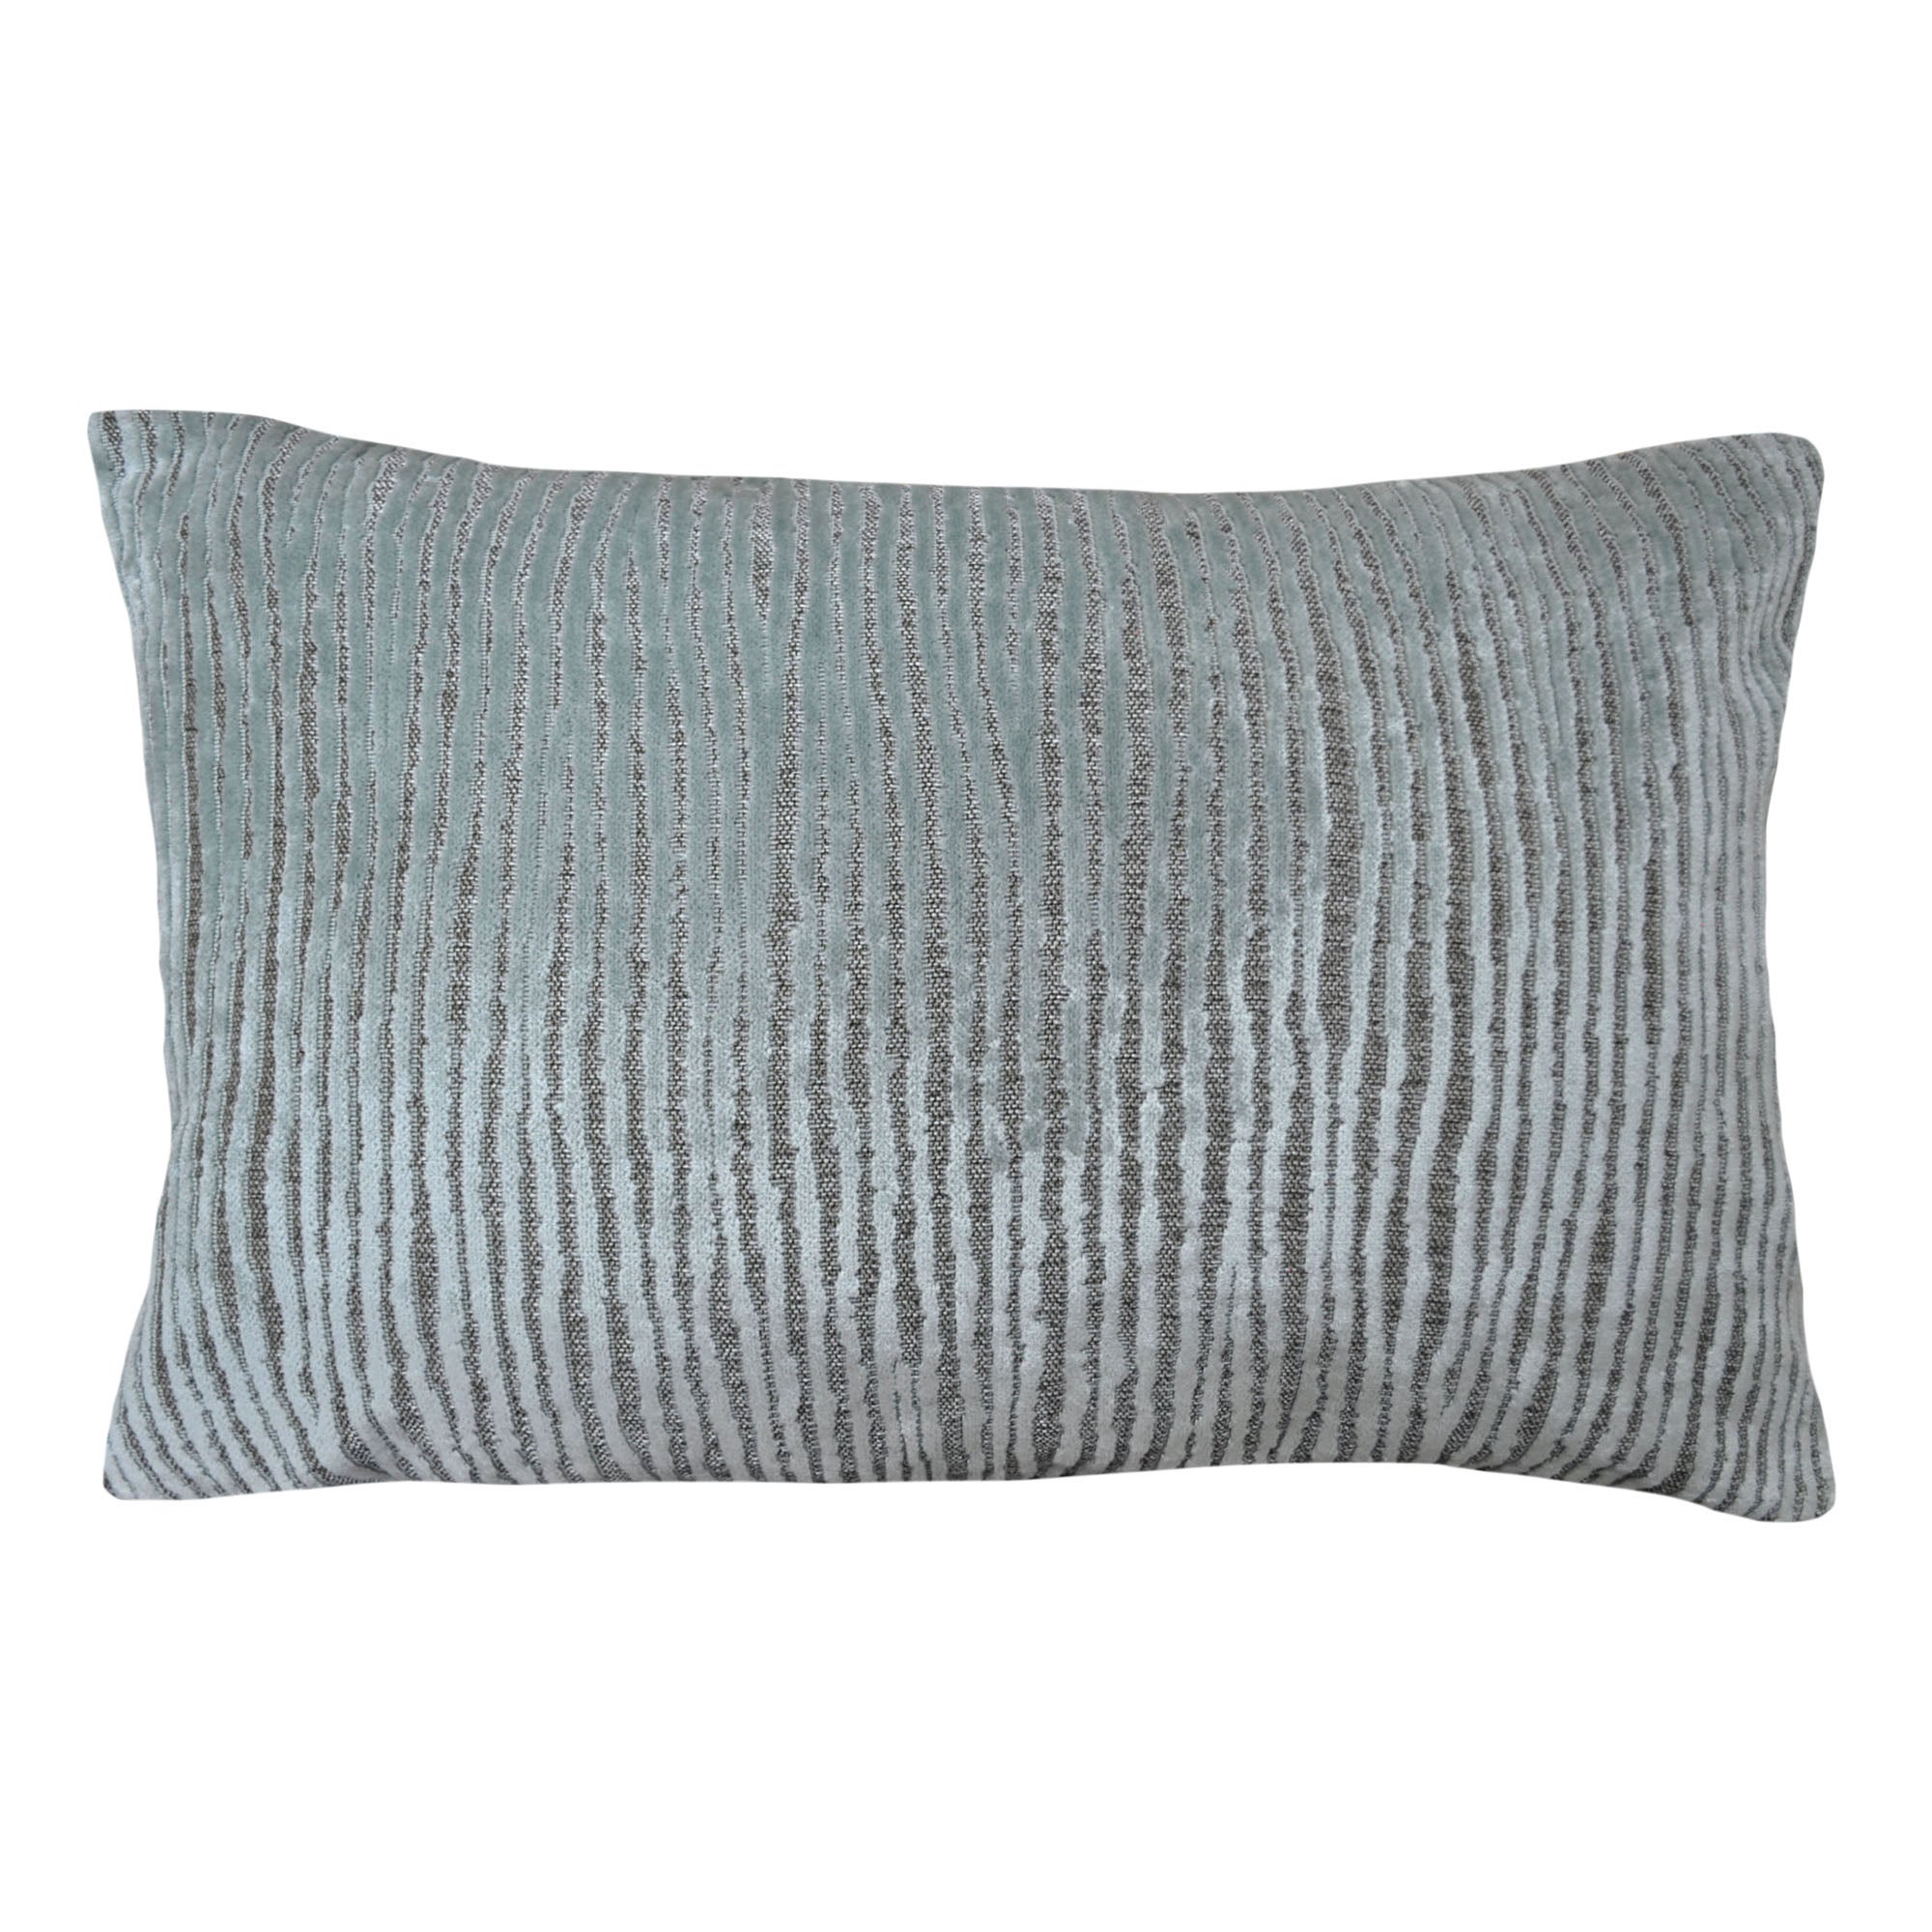 Filled Cushions | Small & Large Filled Cushions | Dunelm - Page 3